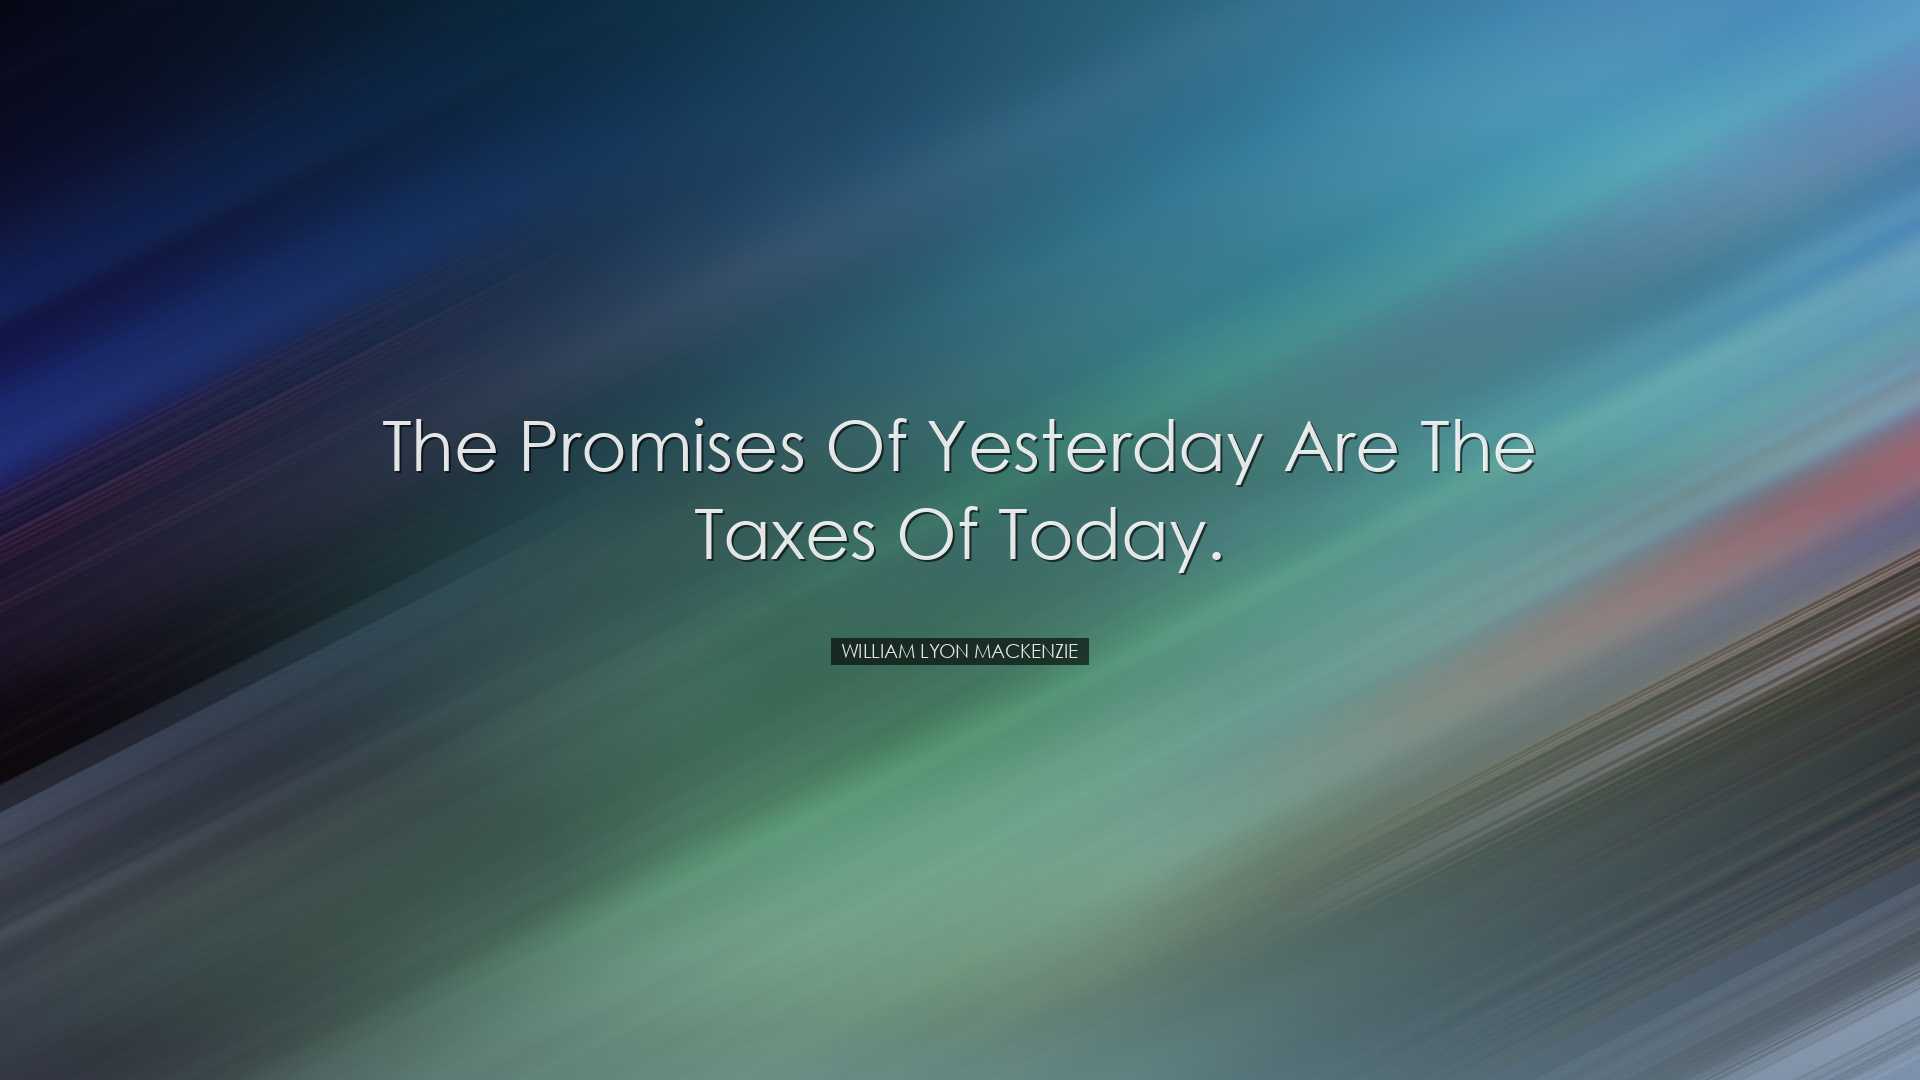 The promises of yesterday are the taxes of today. - William Lyon M